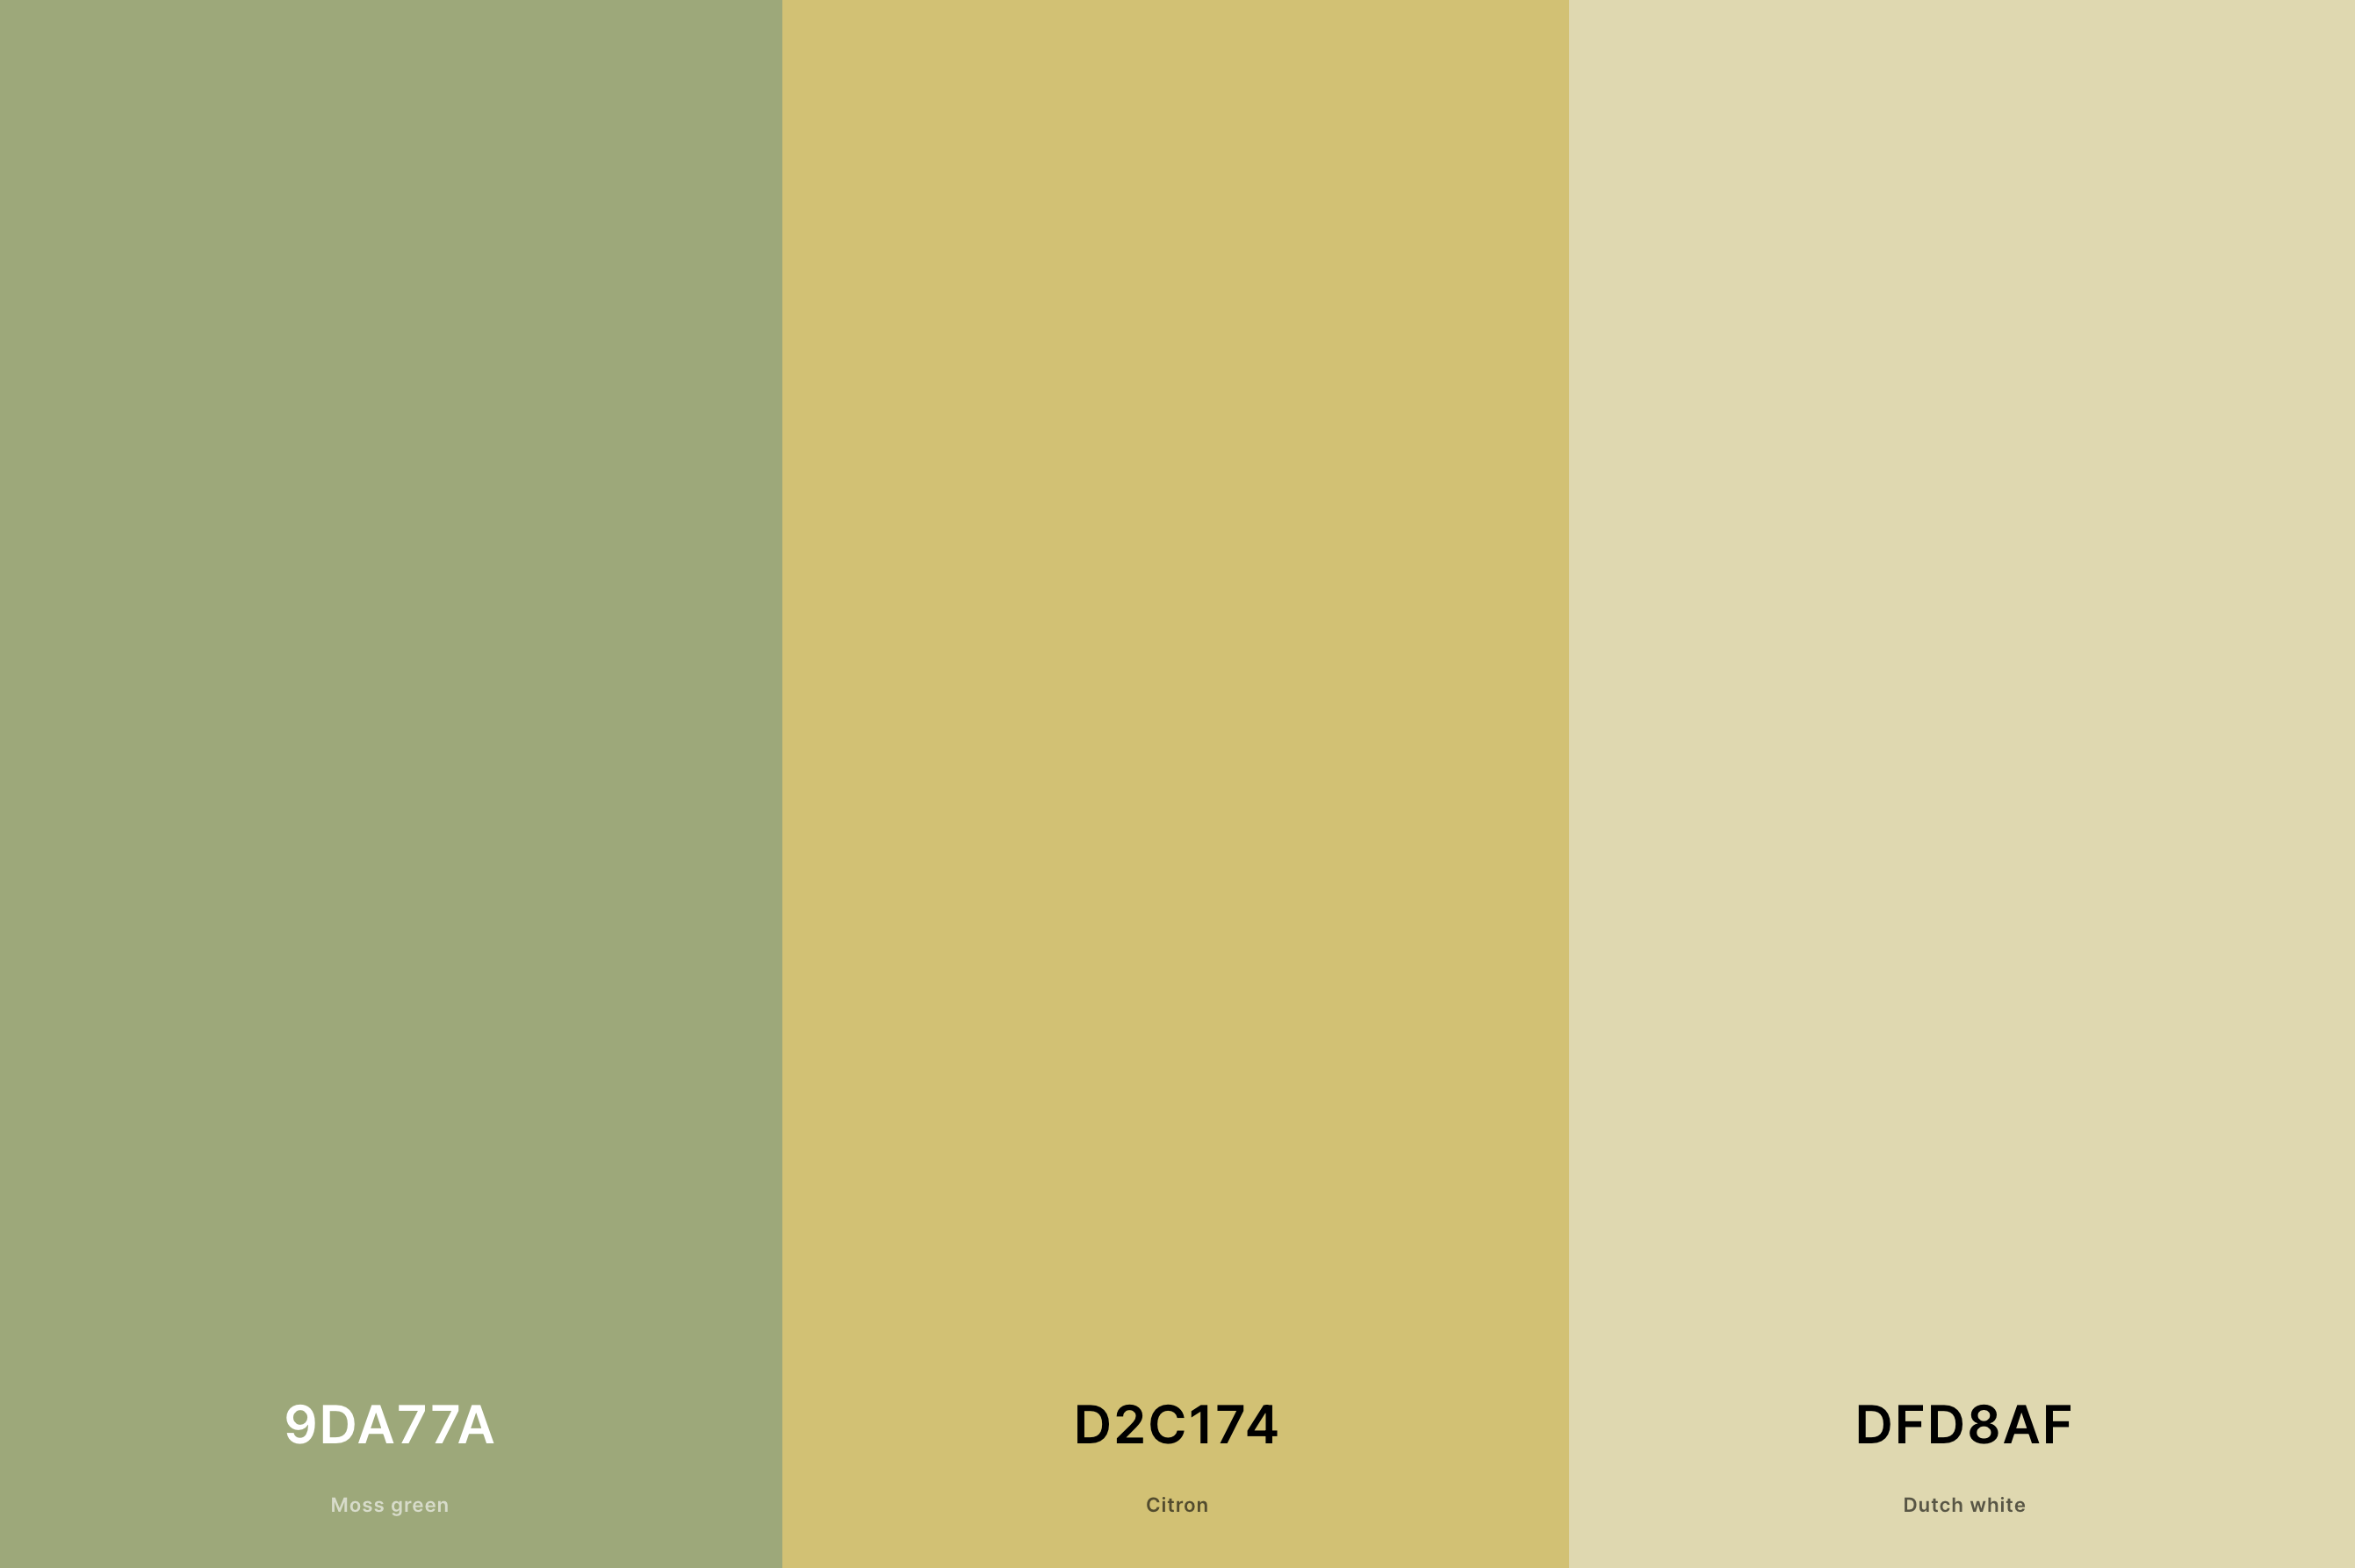 7. Green and Yellow Summer Fresh Palette Color Palette with Moss Green (Hex #9DA77A) + Citron (Hex #D2C174) + Dutch White (Hex #DFD8AF) with Hex Codes